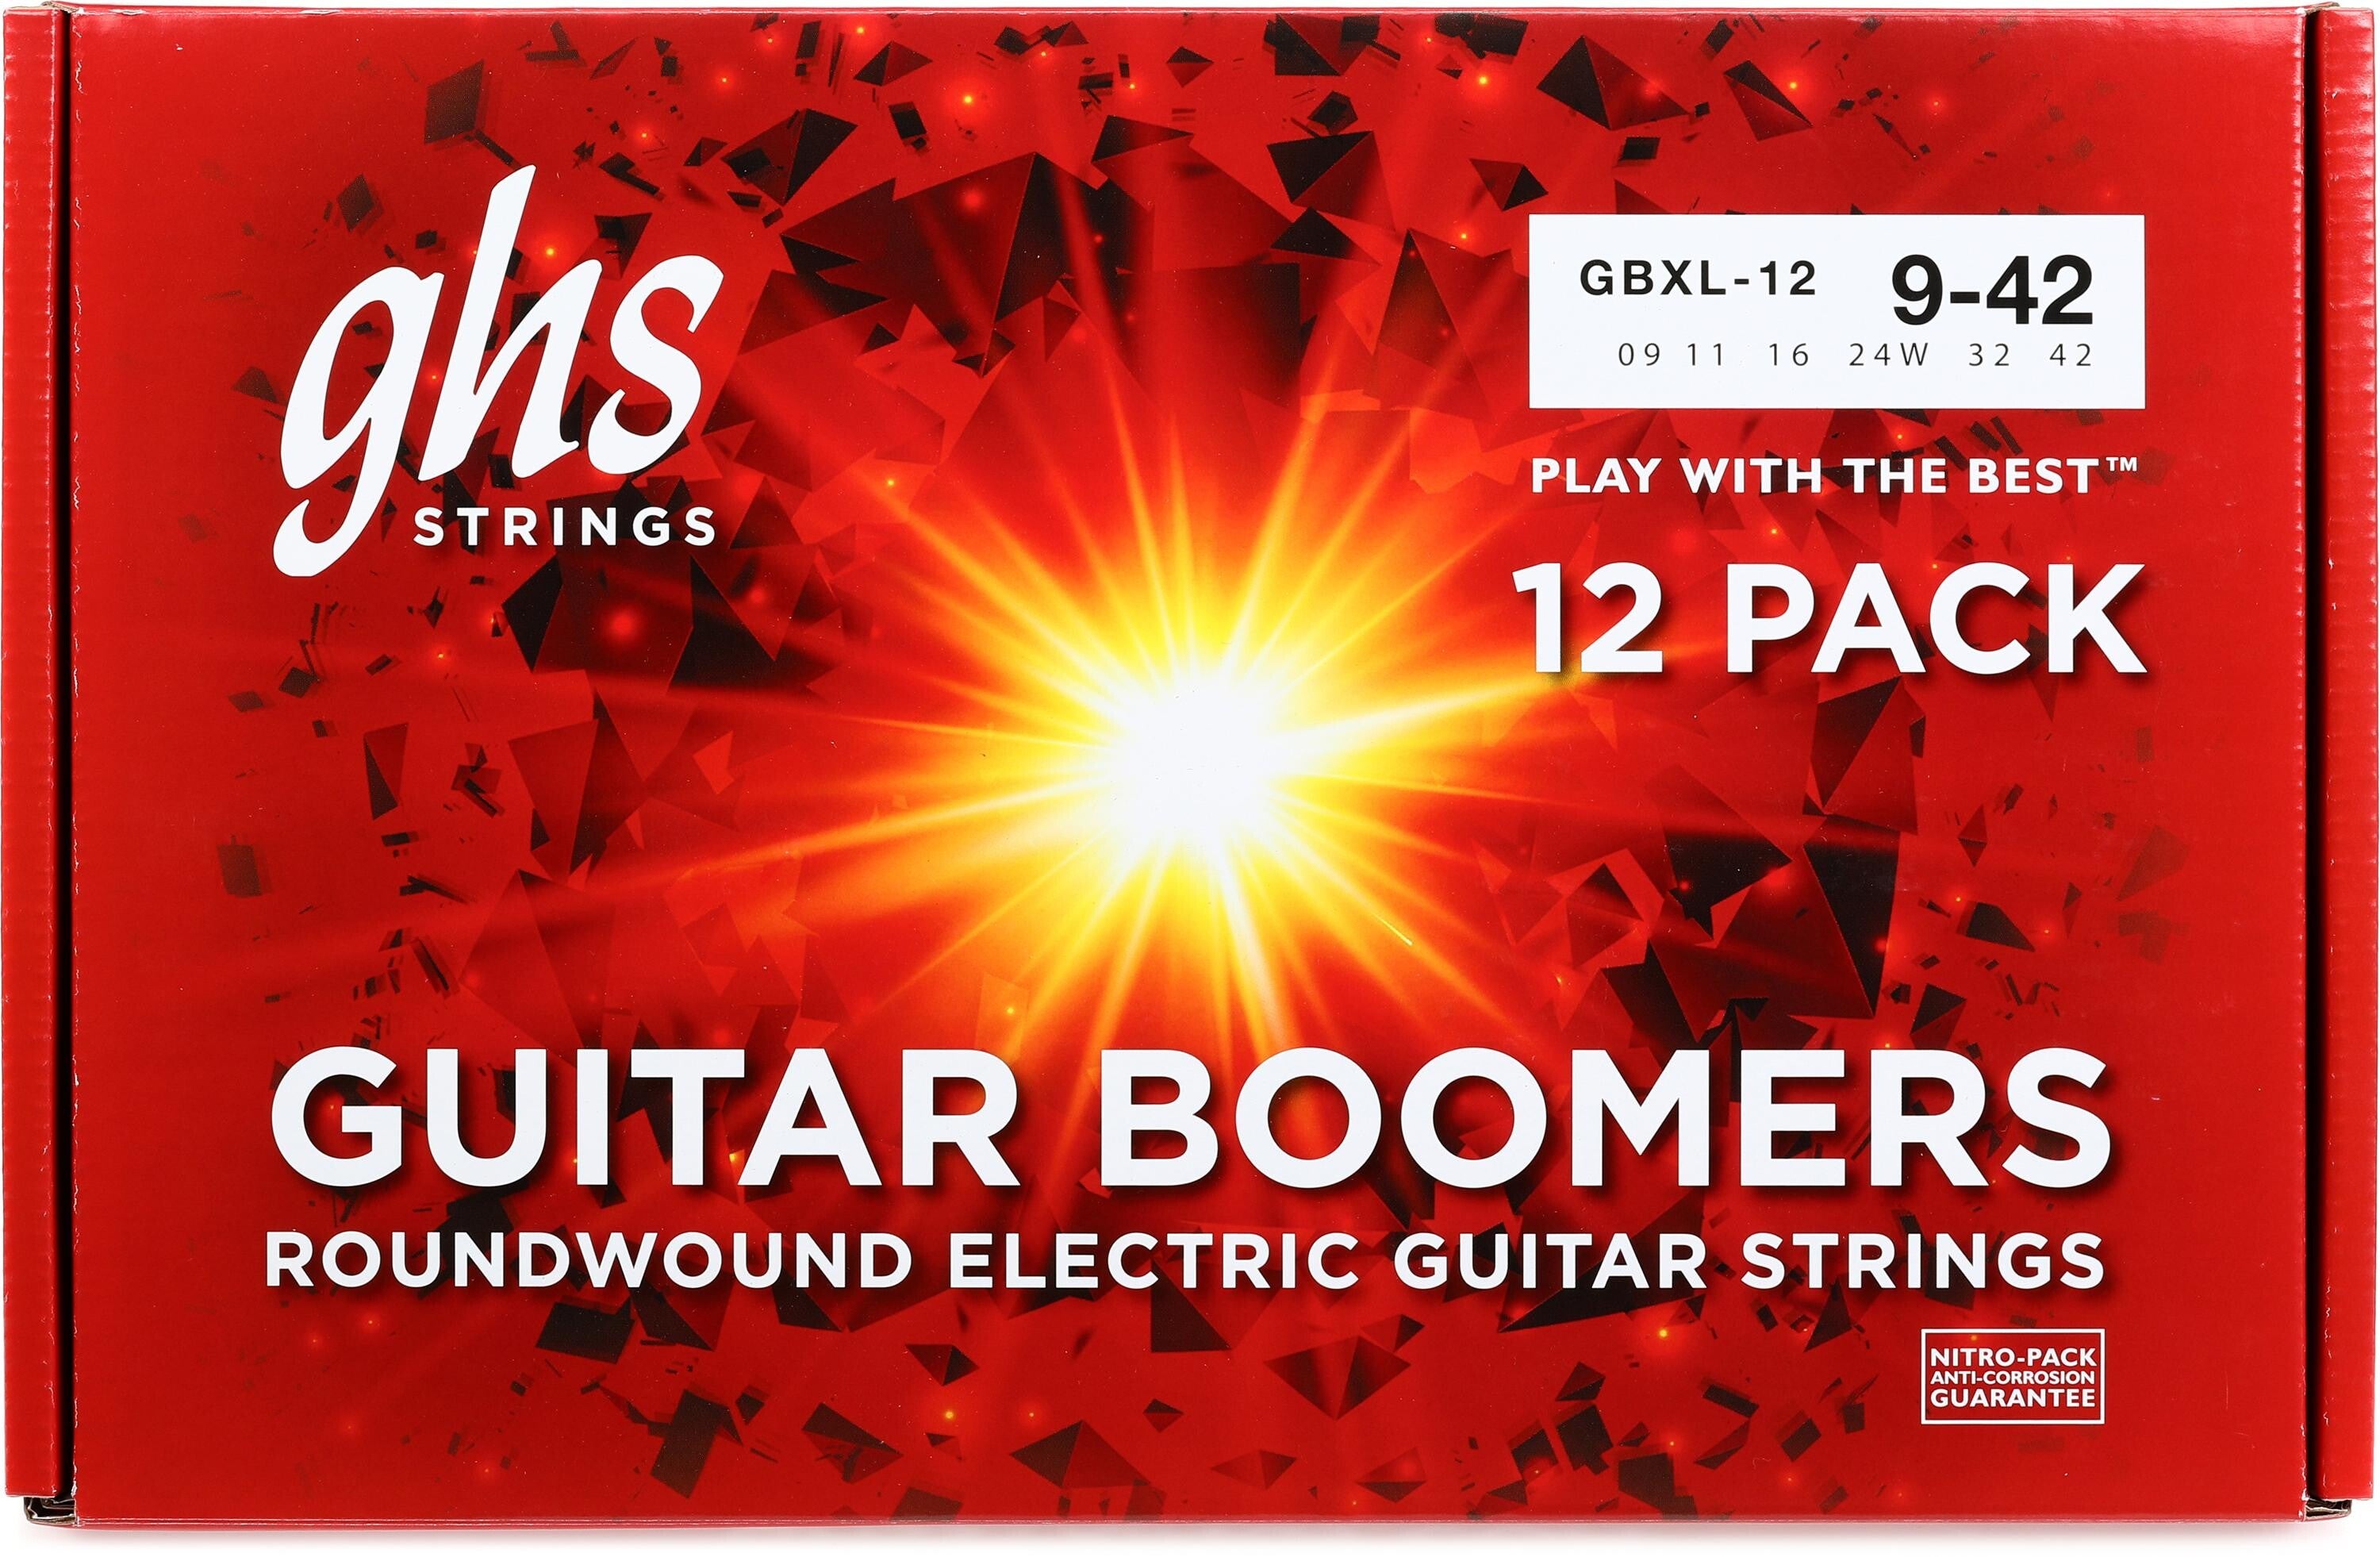 GHS Boomers 10-46 Sets (3) & Fast Fret – The Guitar Parts Store